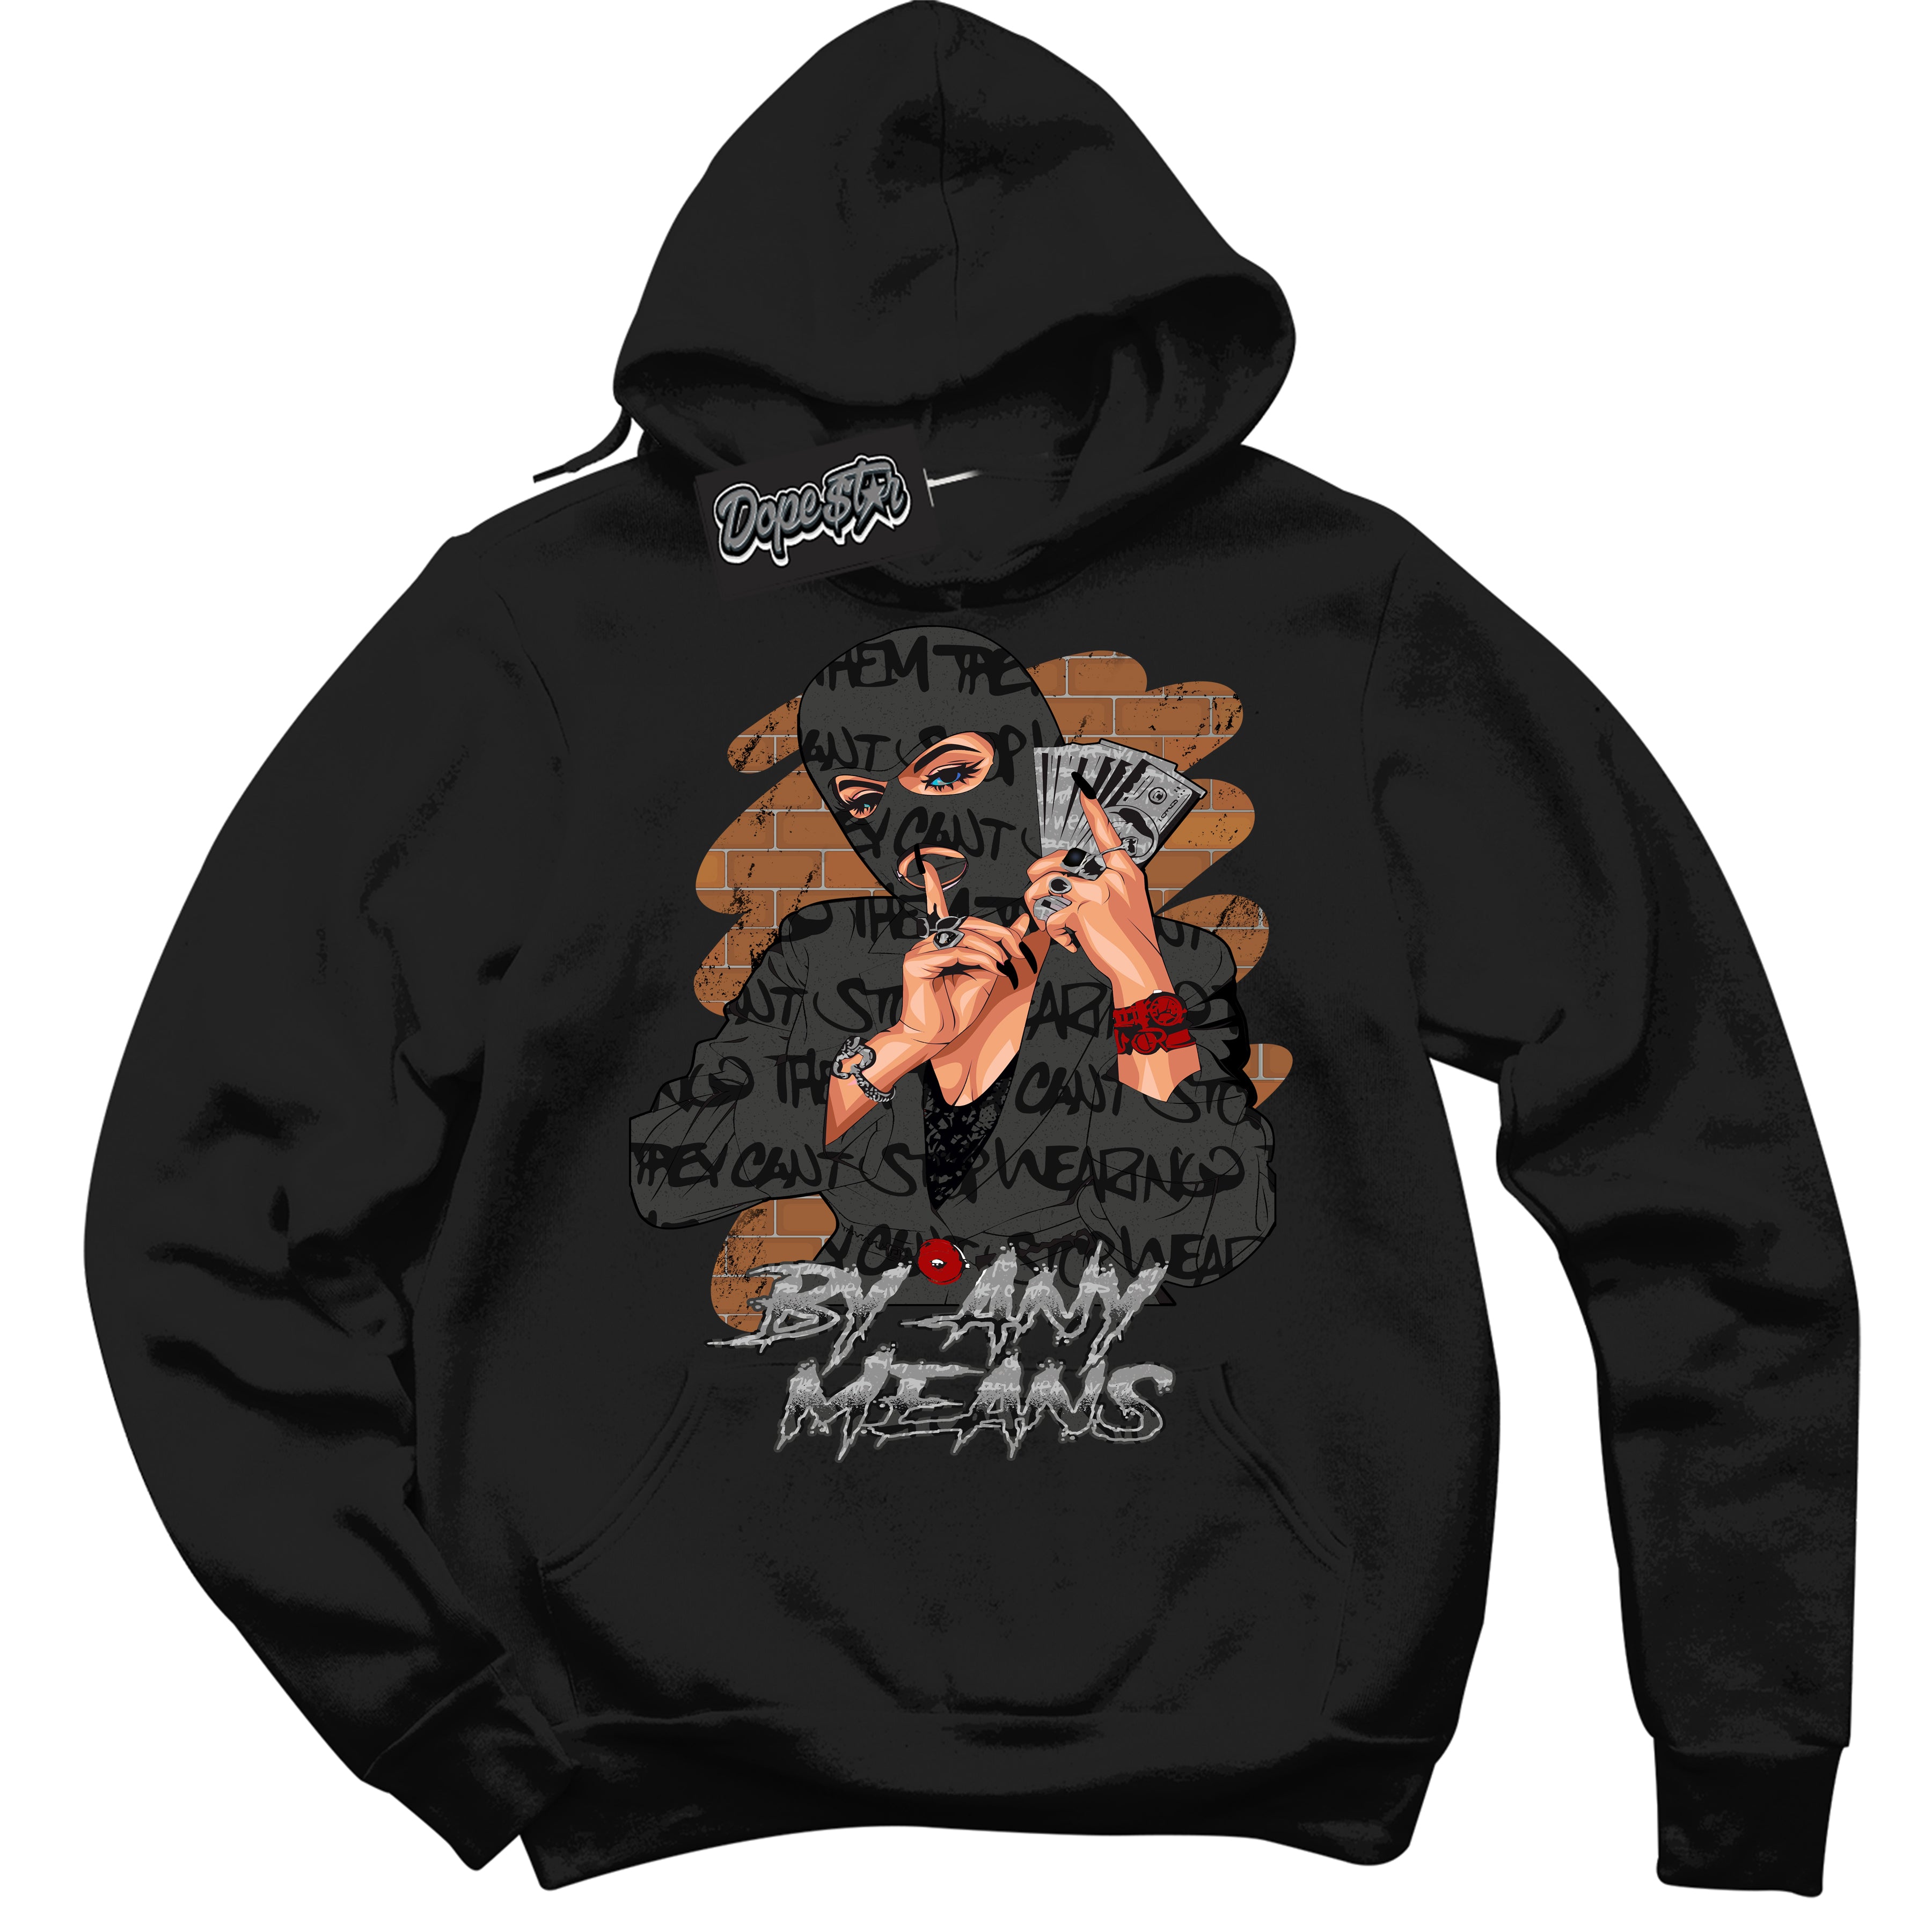 Cool Black Hoodie with “ By Any Means ”  design that Perfectly Matches Rebellionaire 1s Sneakers.